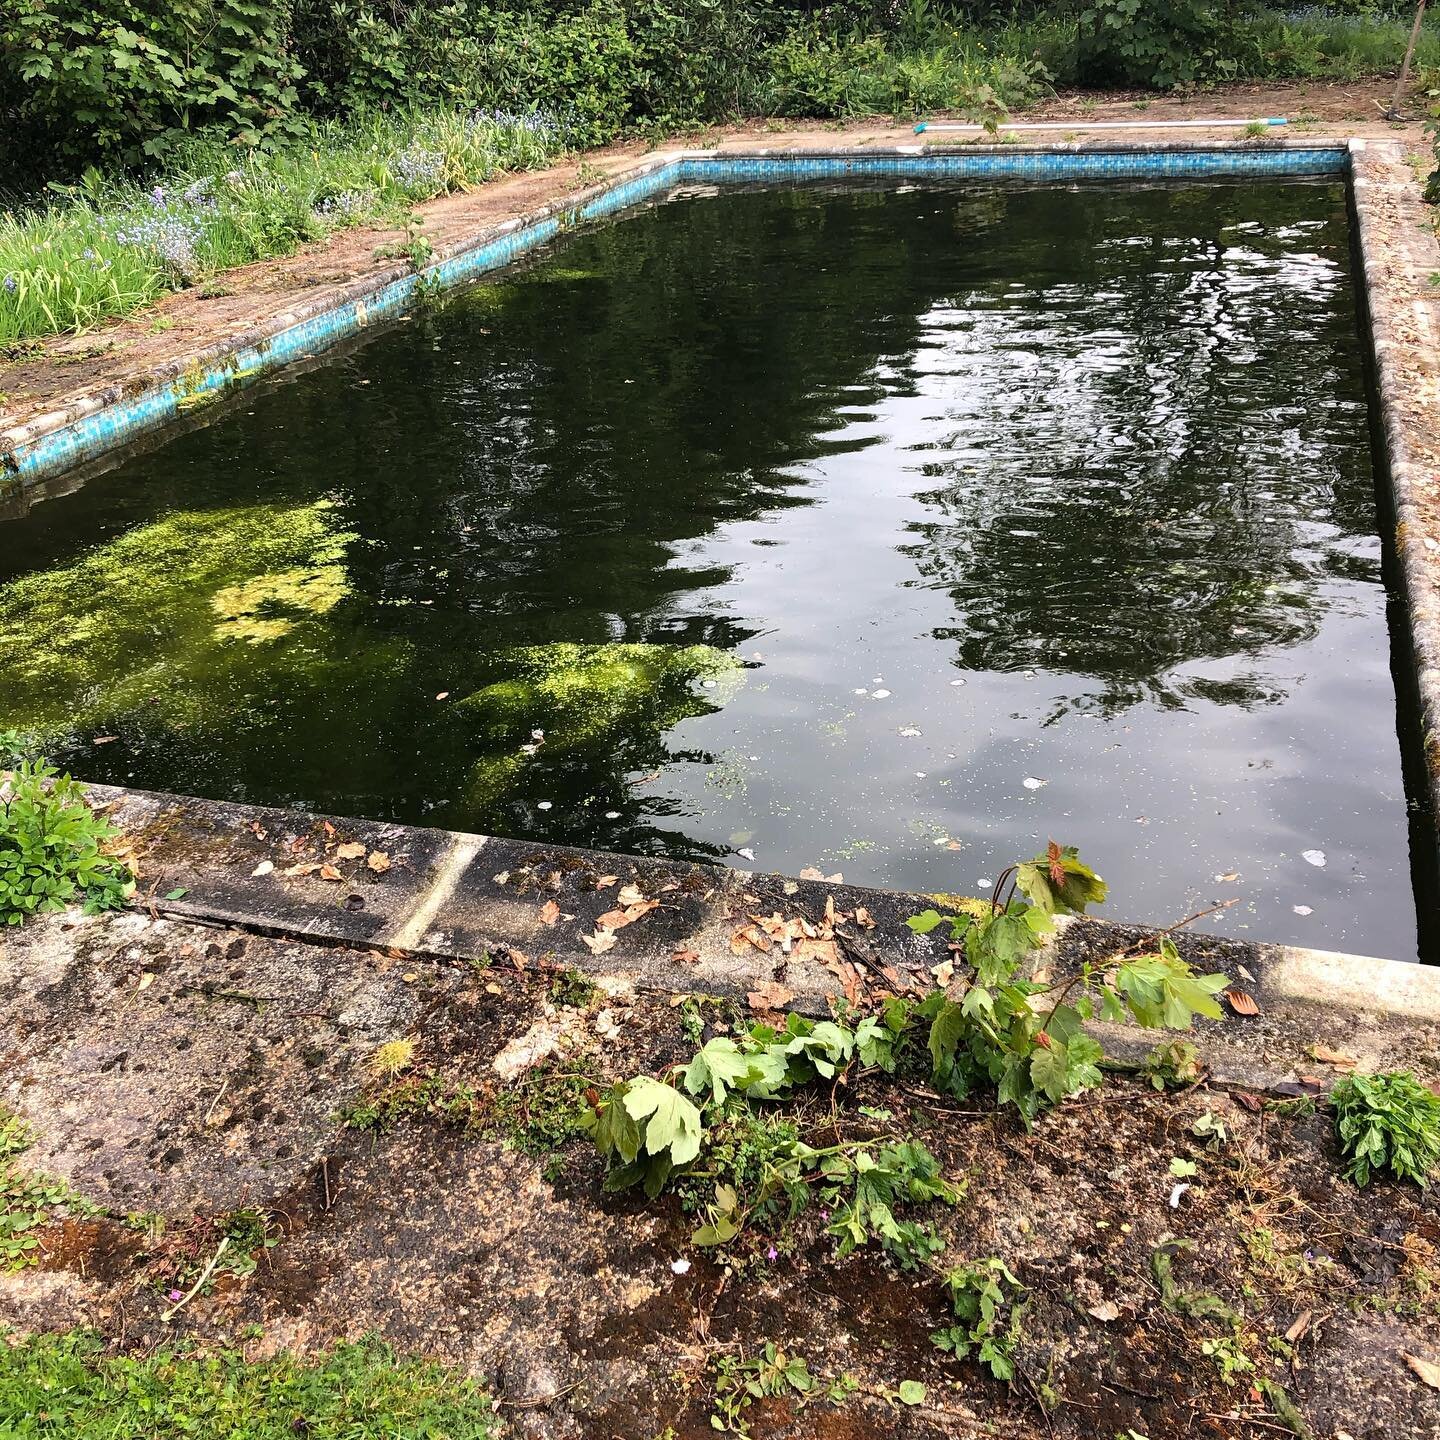 Paving removed, pool emptied and cleaned-first phase complete. Really looking forward to giving our client a beautiful &lsquo;new&rsquo; pool to enjoy for years to come!